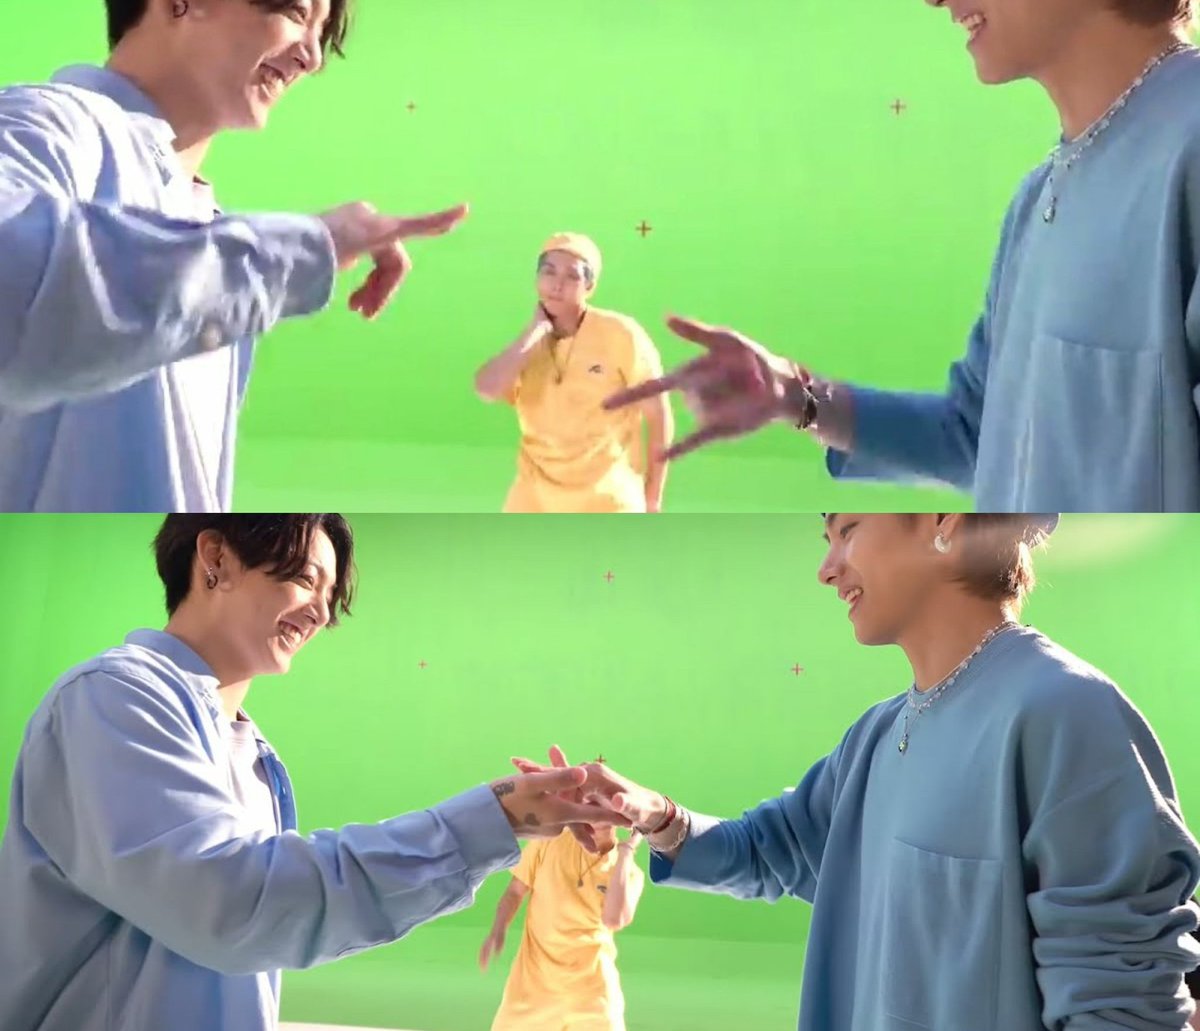 He got a special handshake with his taehyungie with a deep meaning "i promise you i love you"